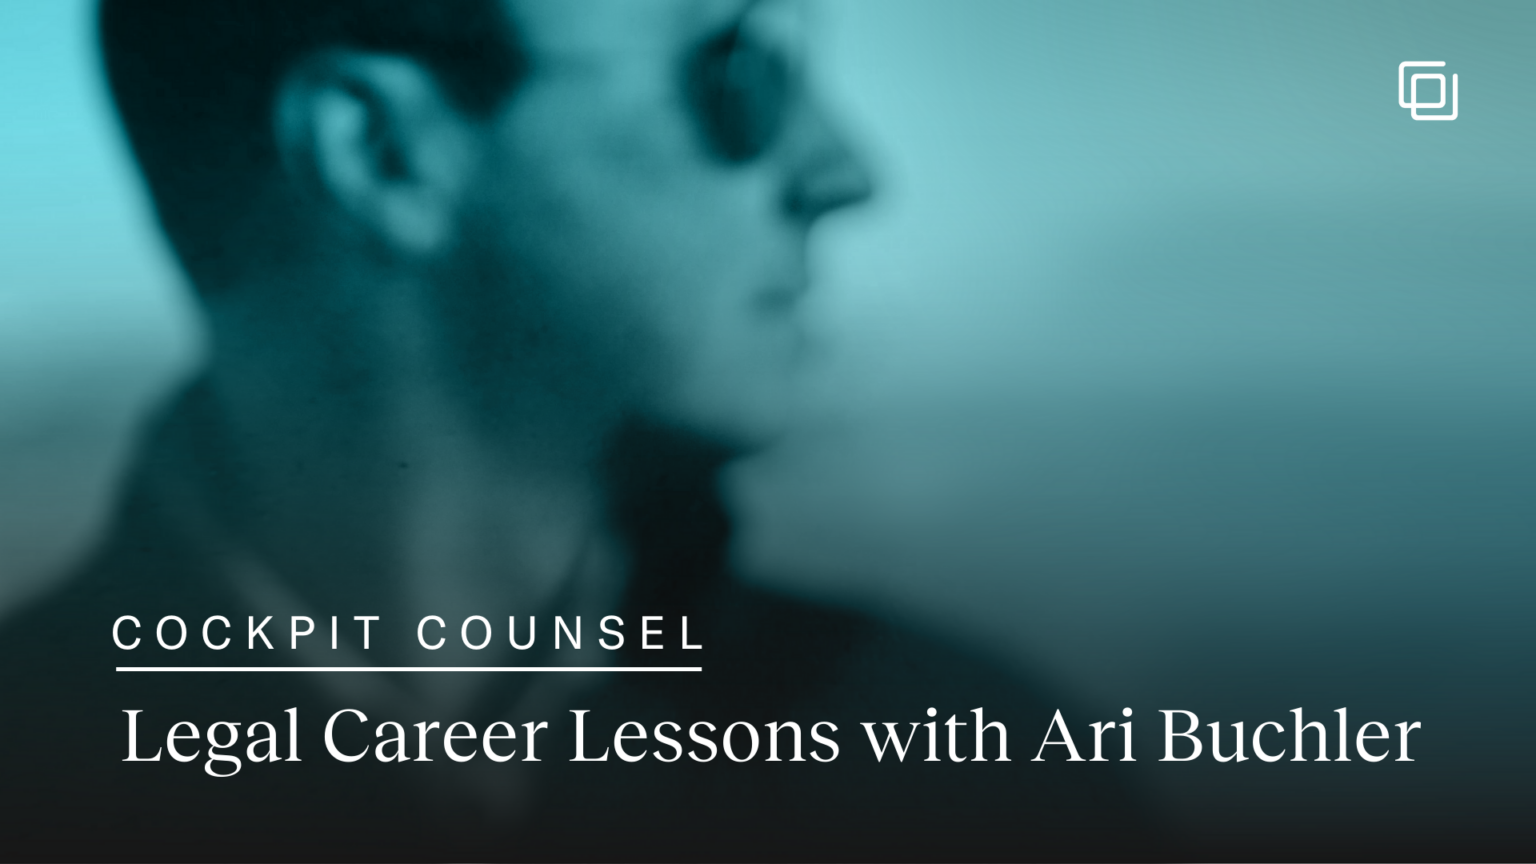 Cockpit Counsel: Legal Career Lessons with Ari Buchler